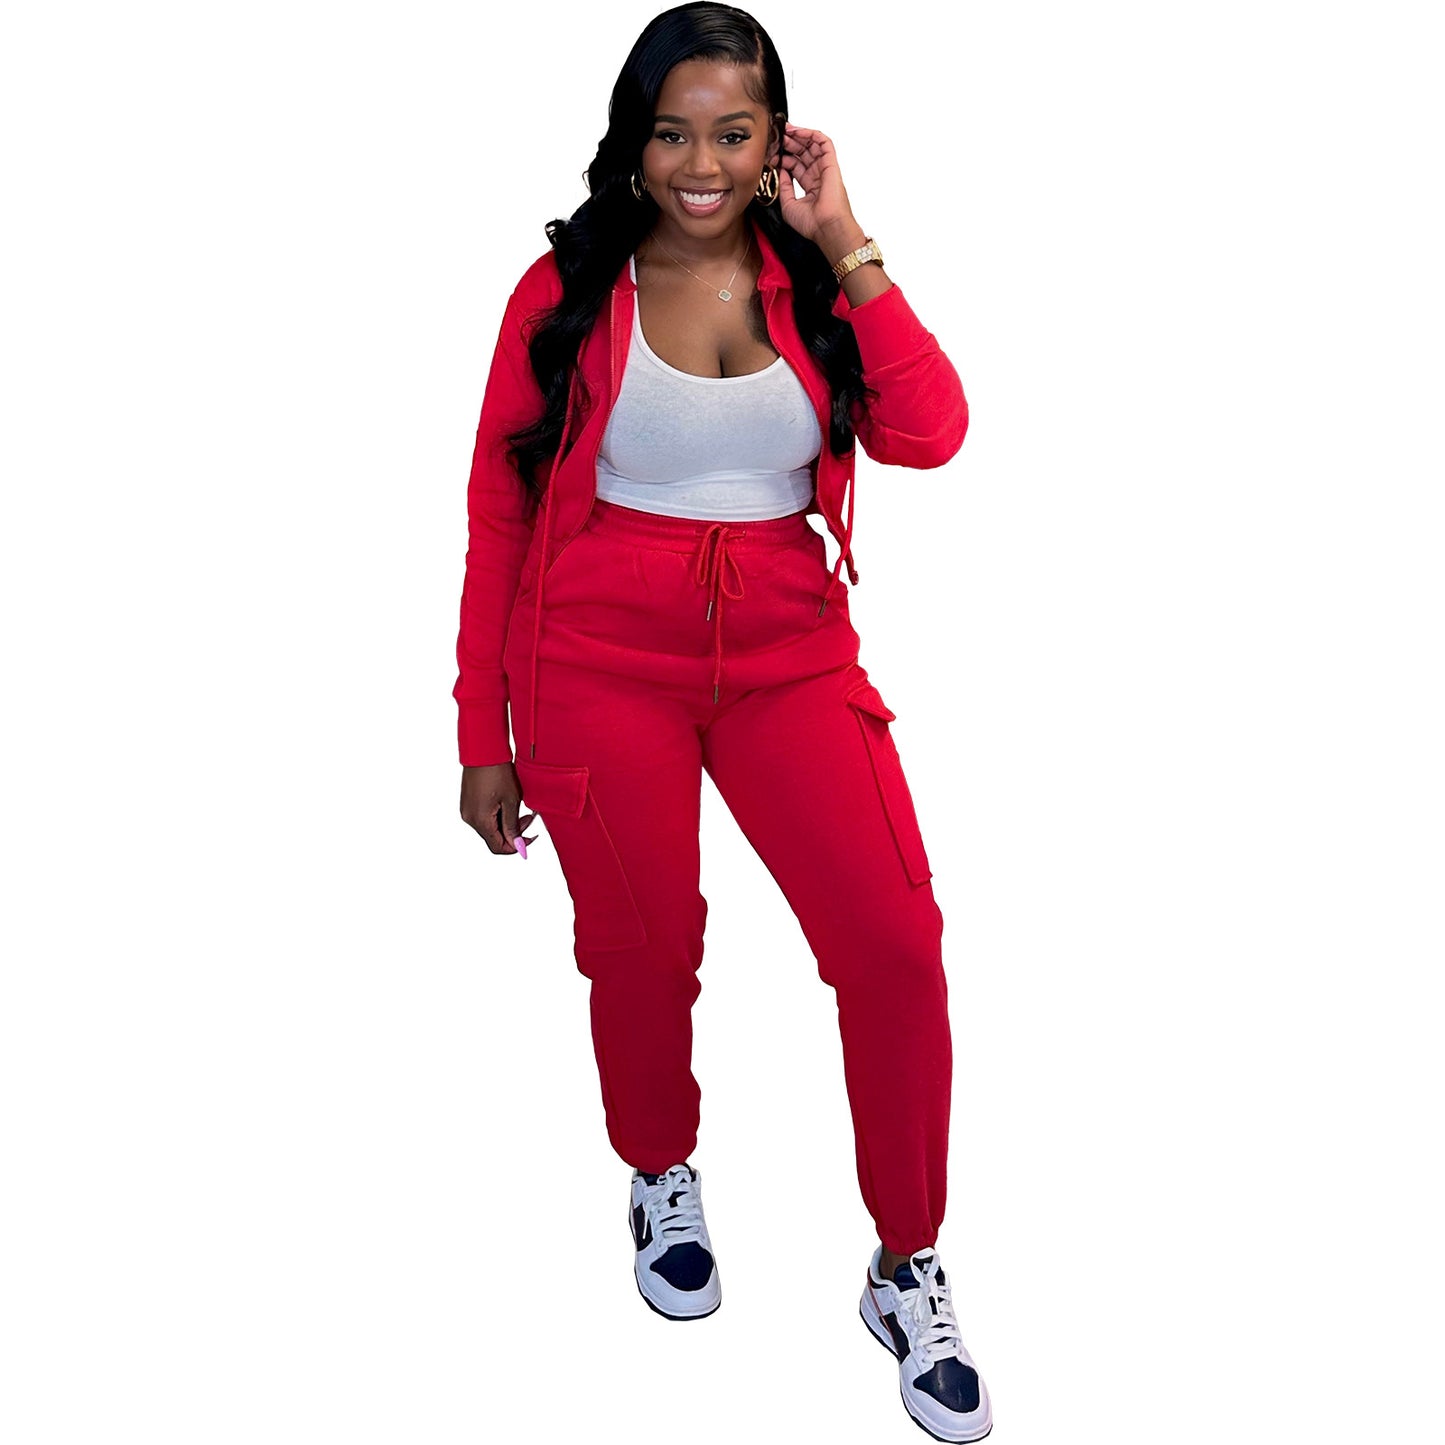 BamBam Women's Patchwork Fleece Casual Sports Hooded Two-Piece Tracksuit Set - BamBam